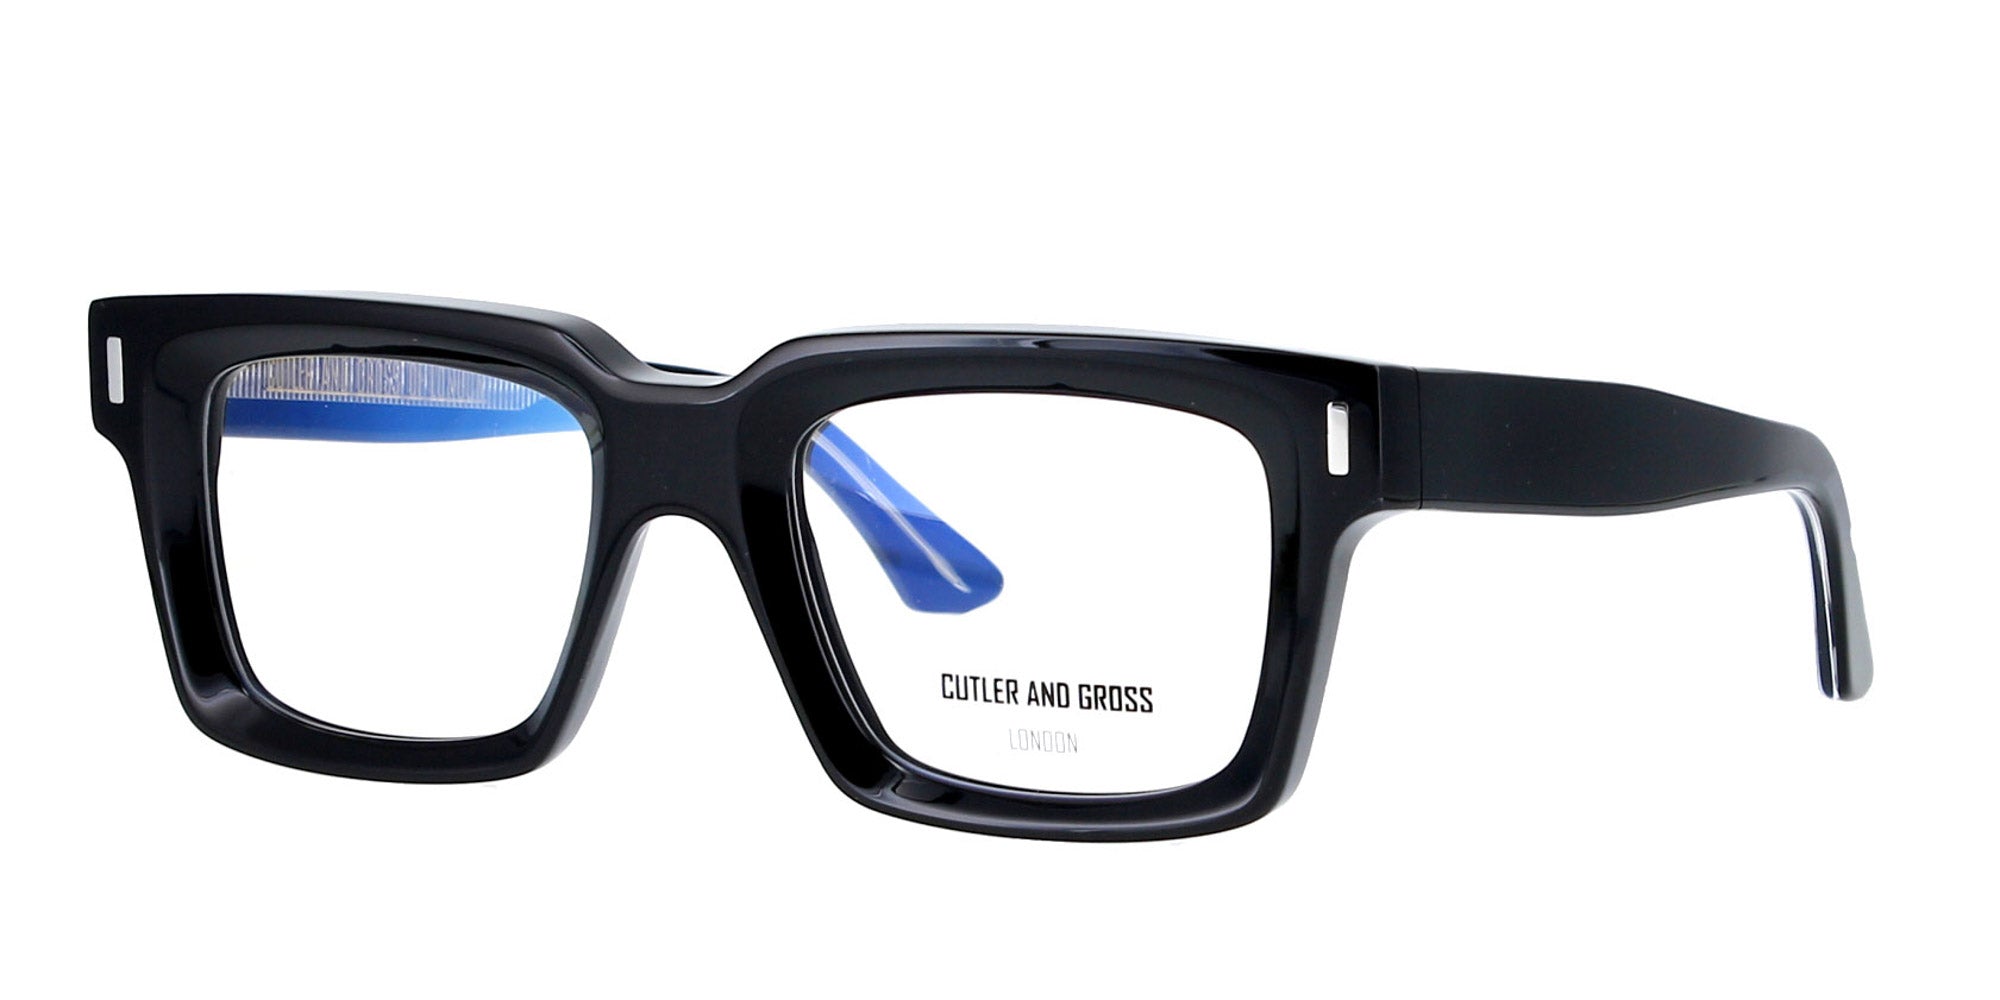 Cutler and Gross 1386 Rectangle Glasses | Fashion Eyewear